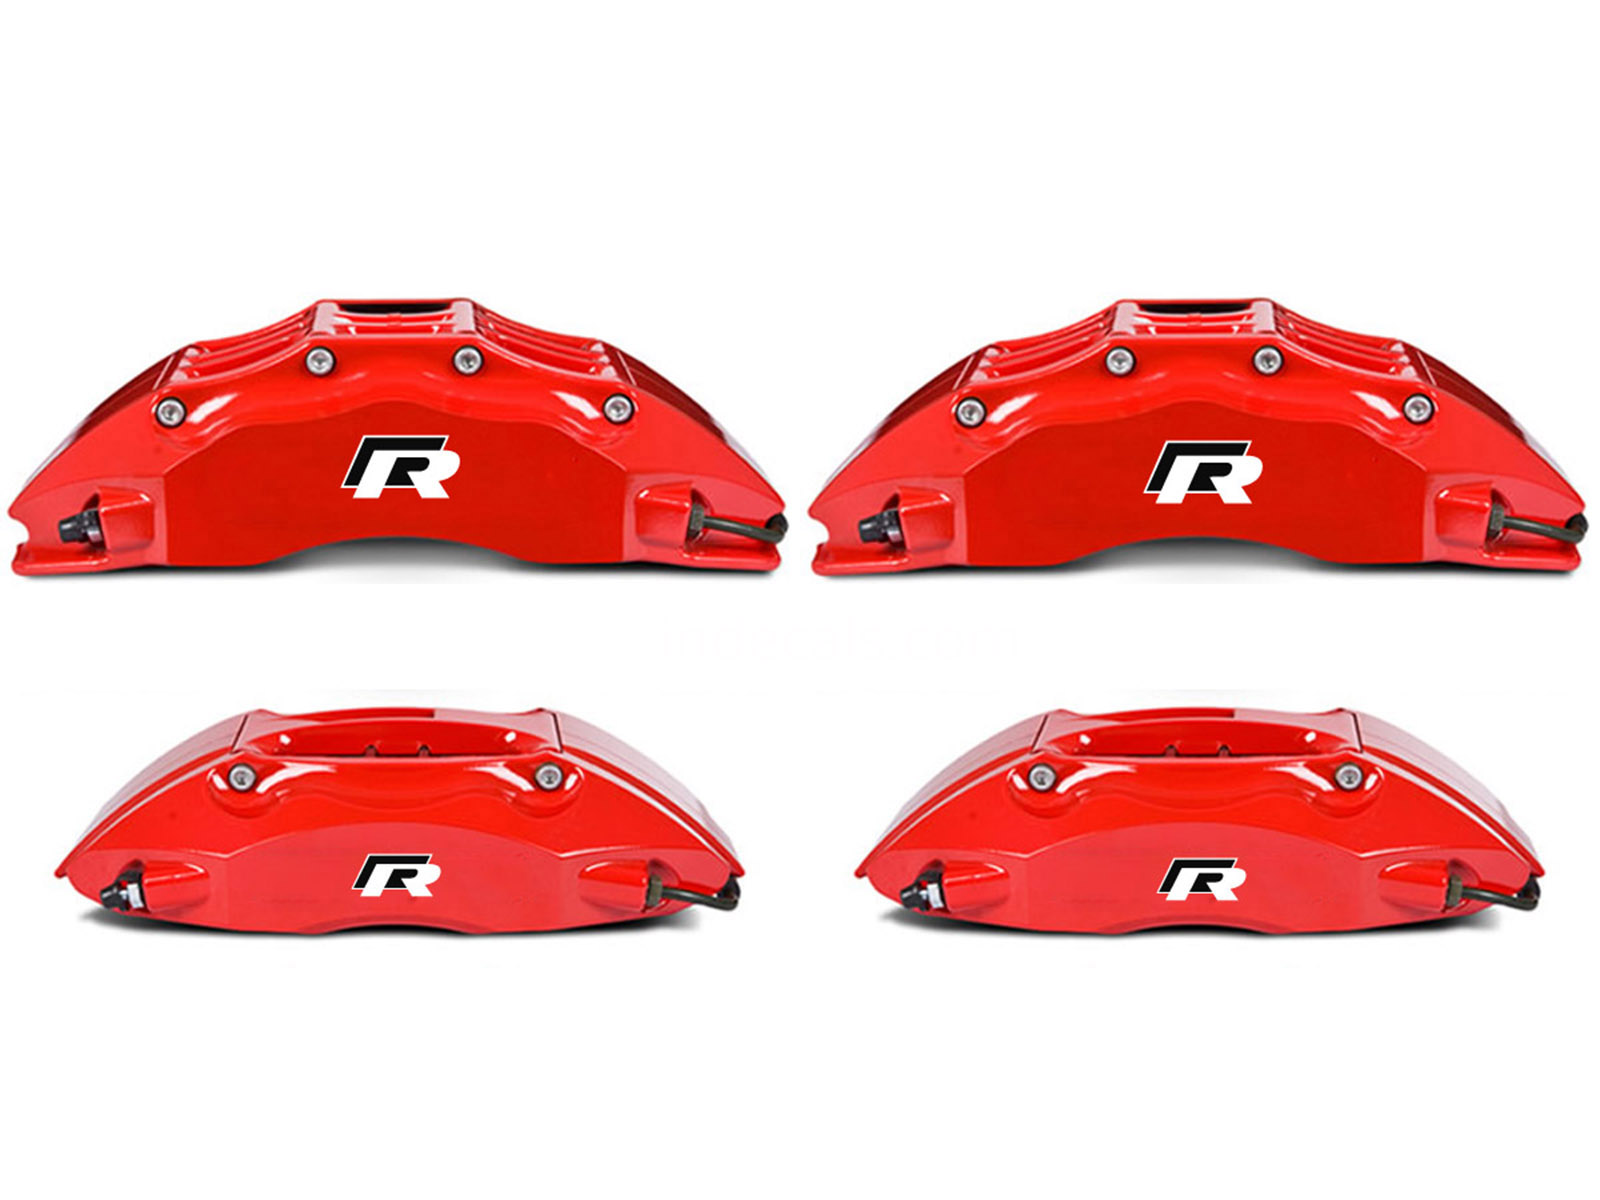 4 x Volkswagen R-Line stickers for Brake Calipers